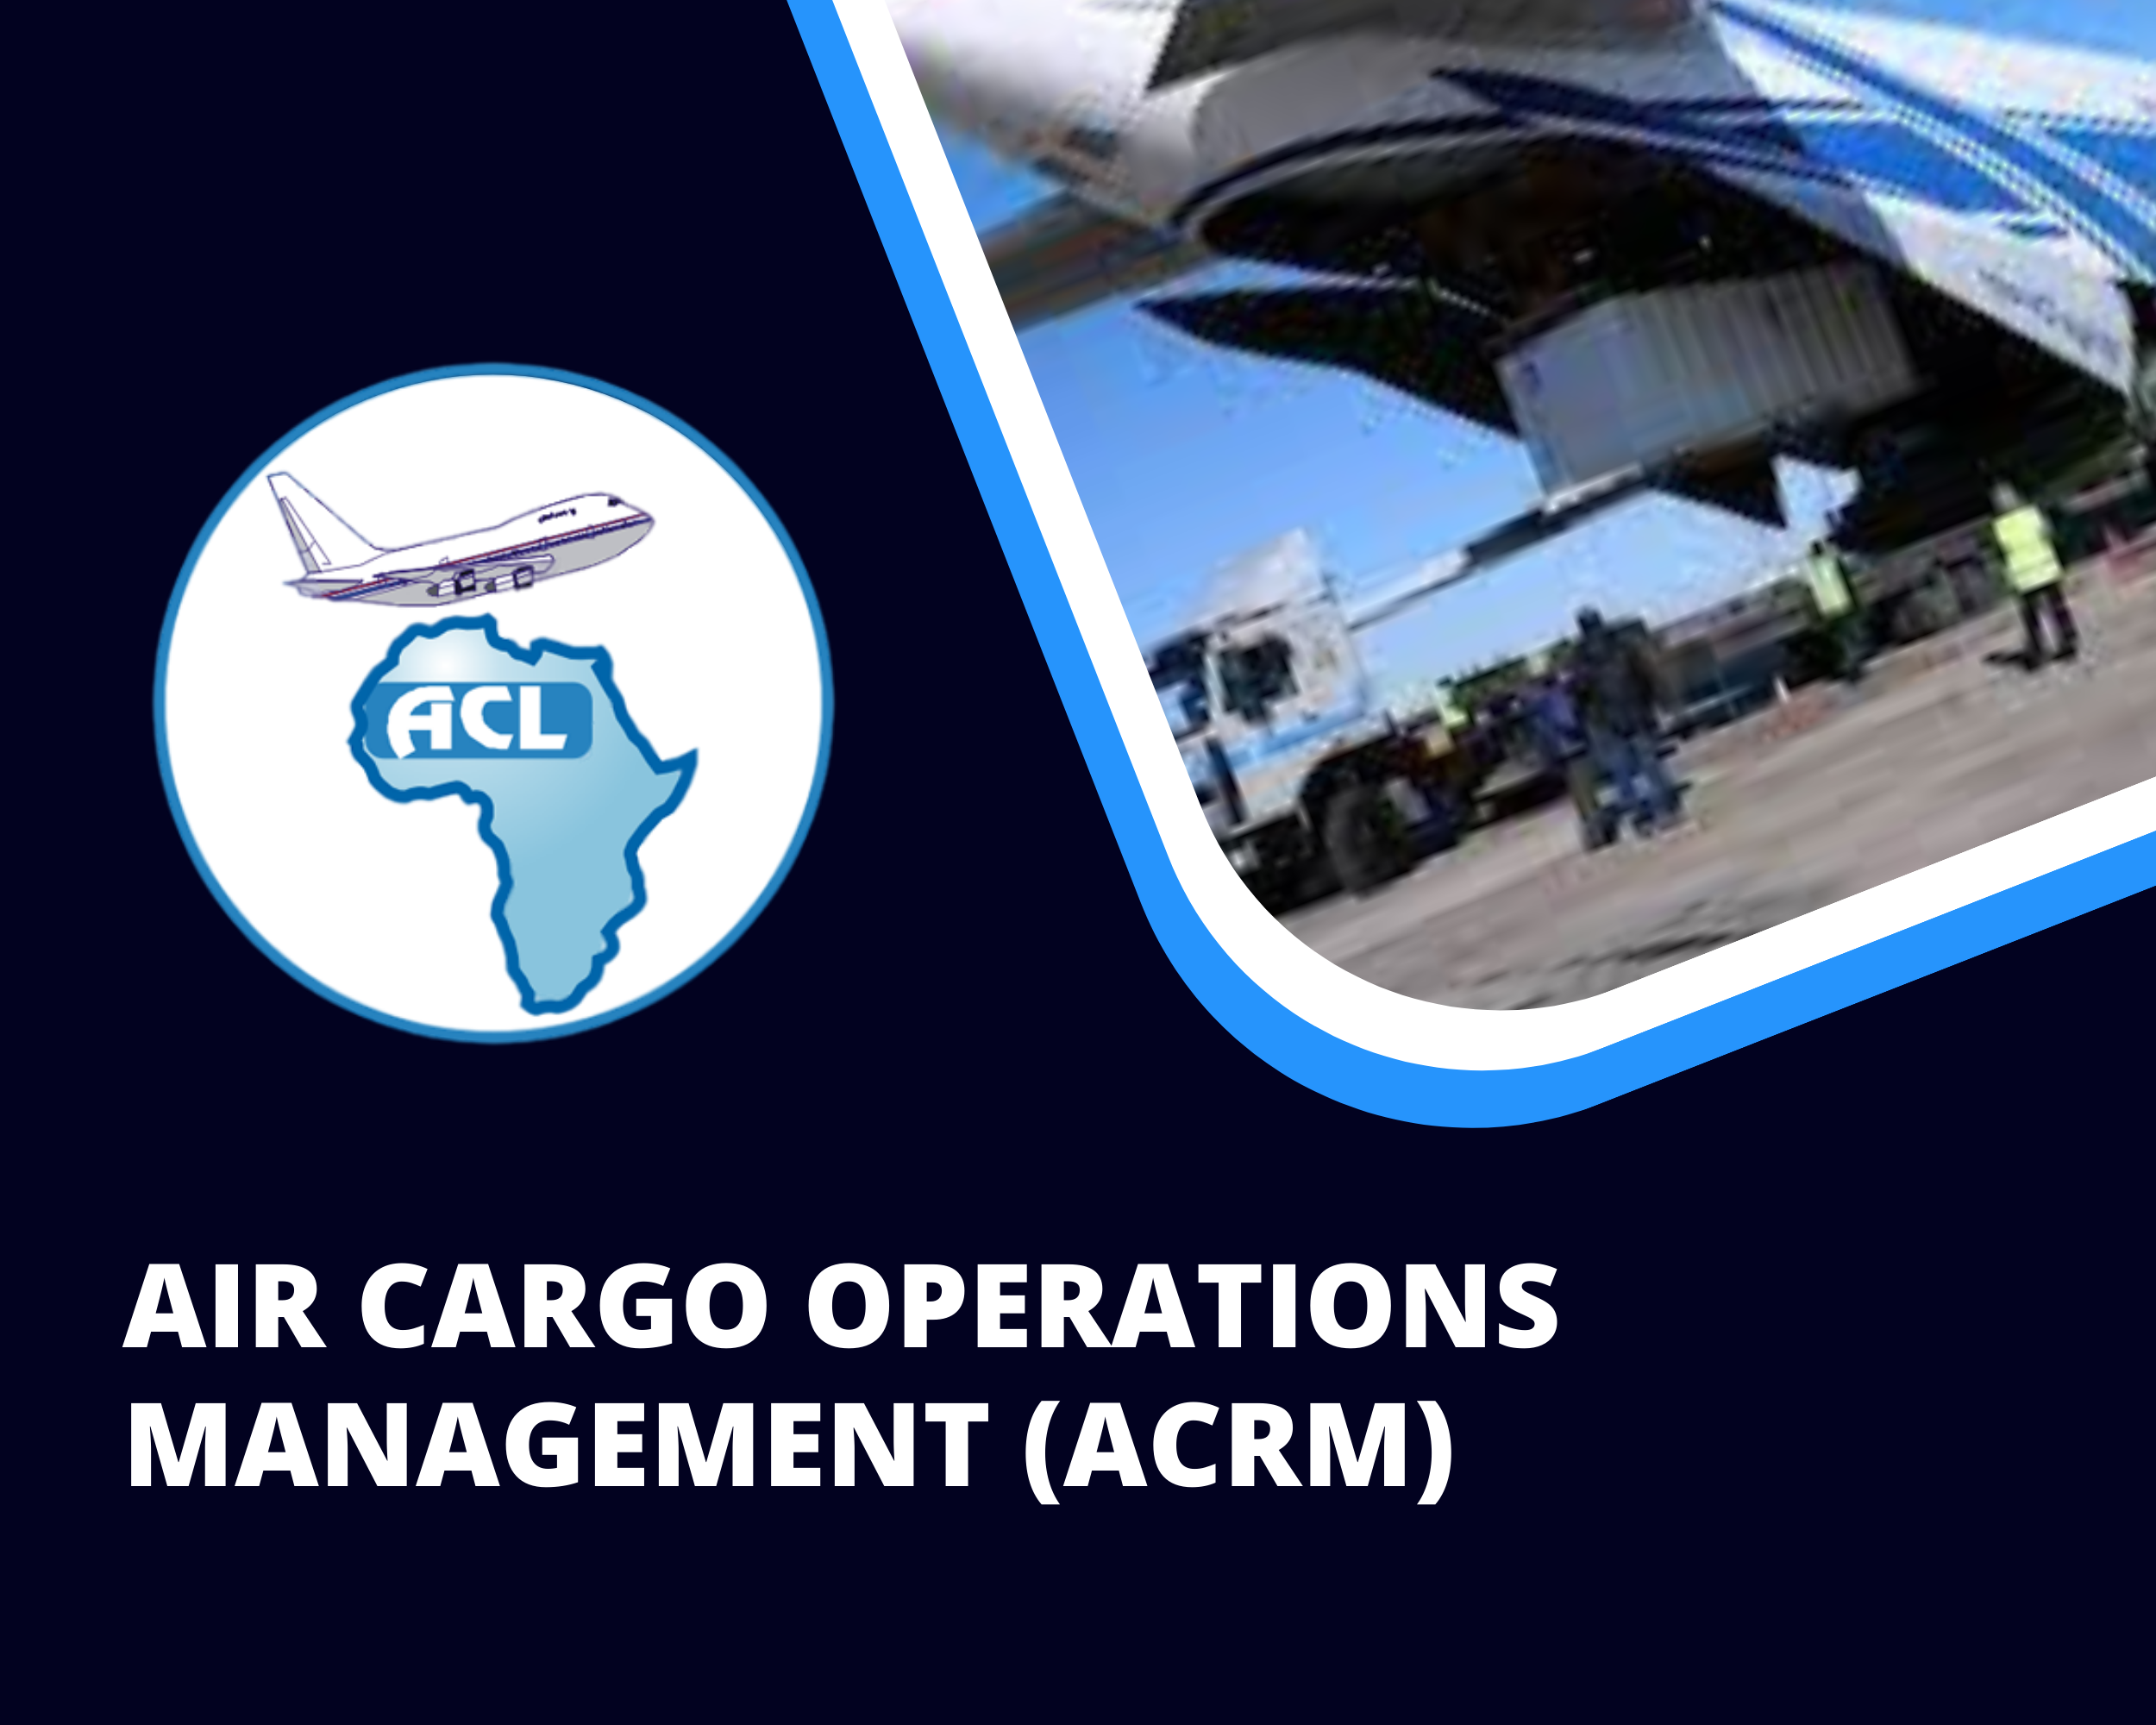 AIR CARGO OPERATIONS MANAGEMENT (ACRM)